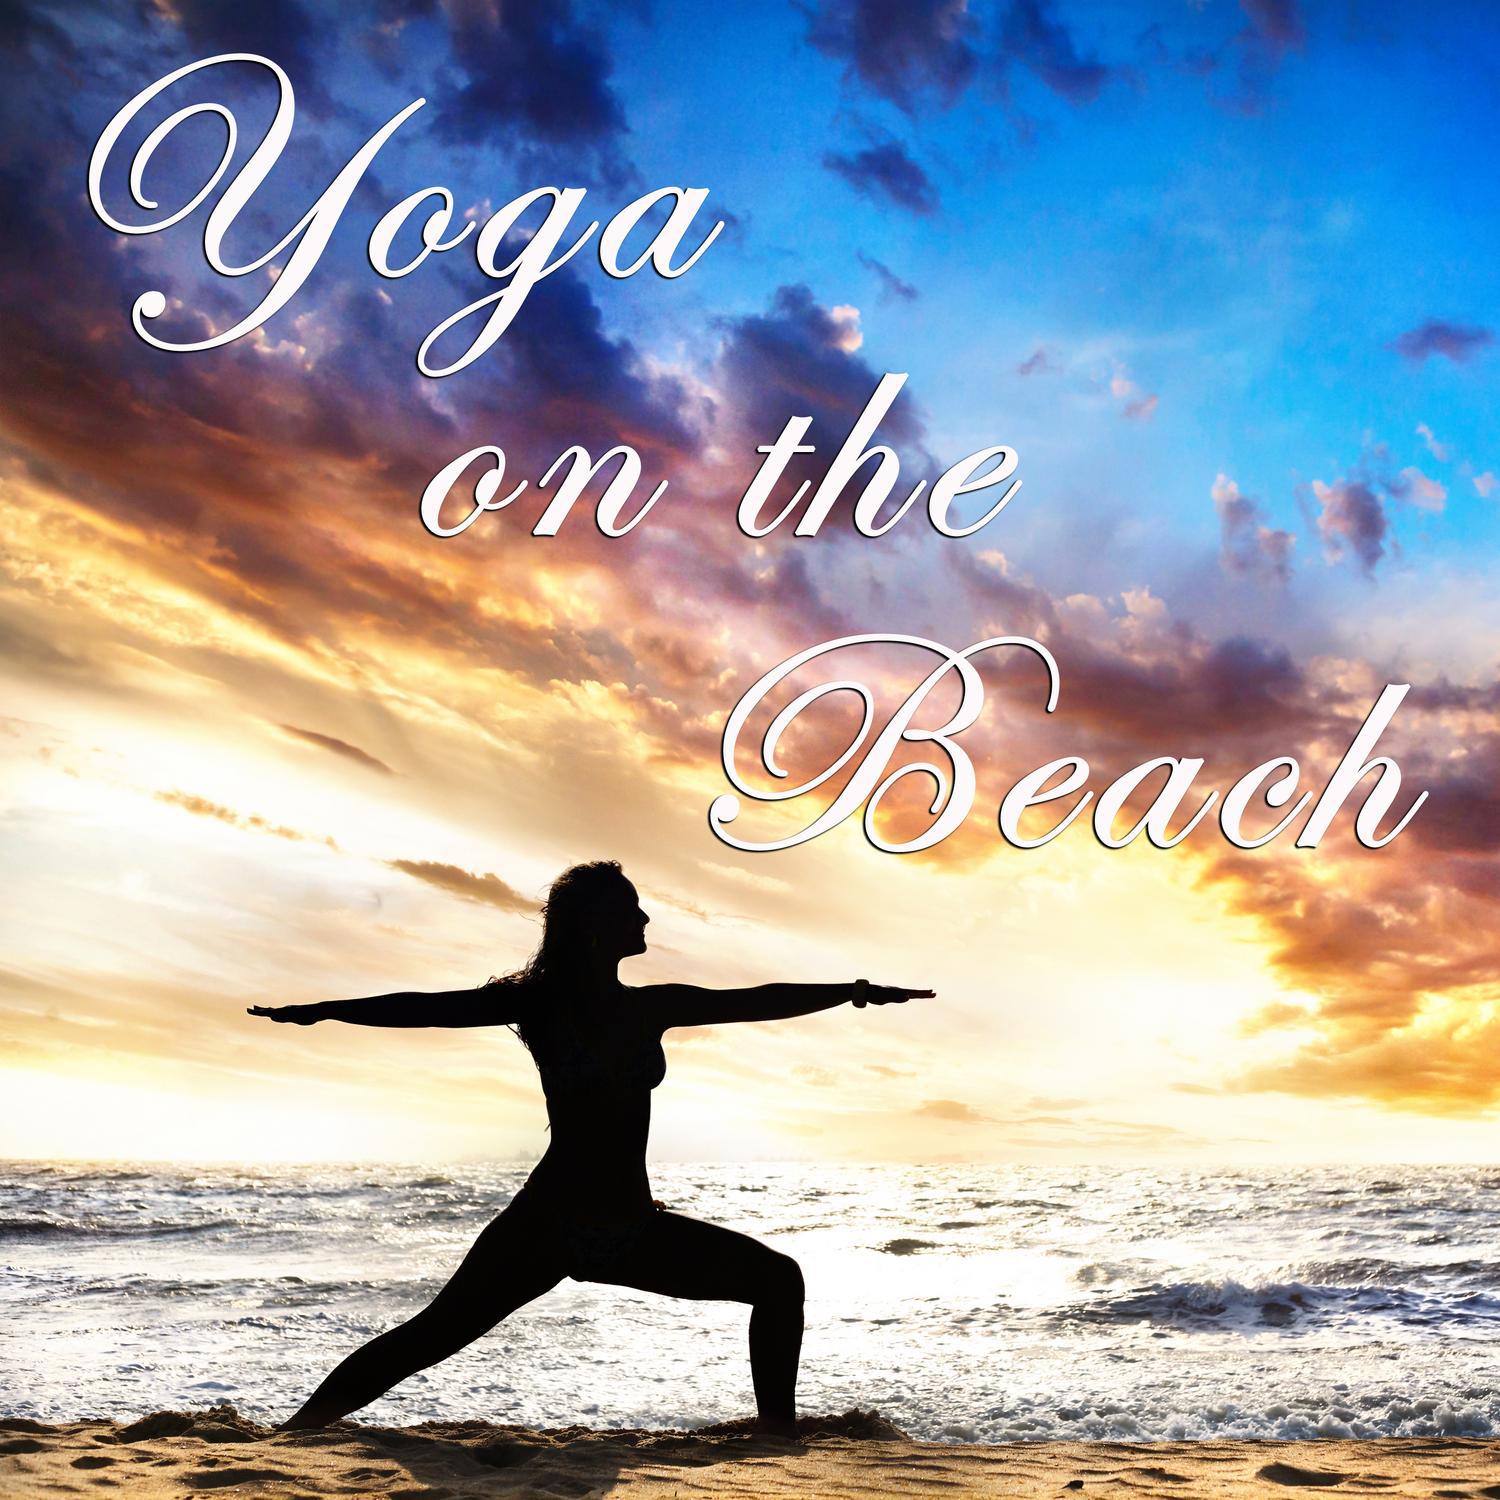 Yoga on the Beach: Relaxing Songs and Nature Sounds for a 30 Minute Yoga Session on the Beach